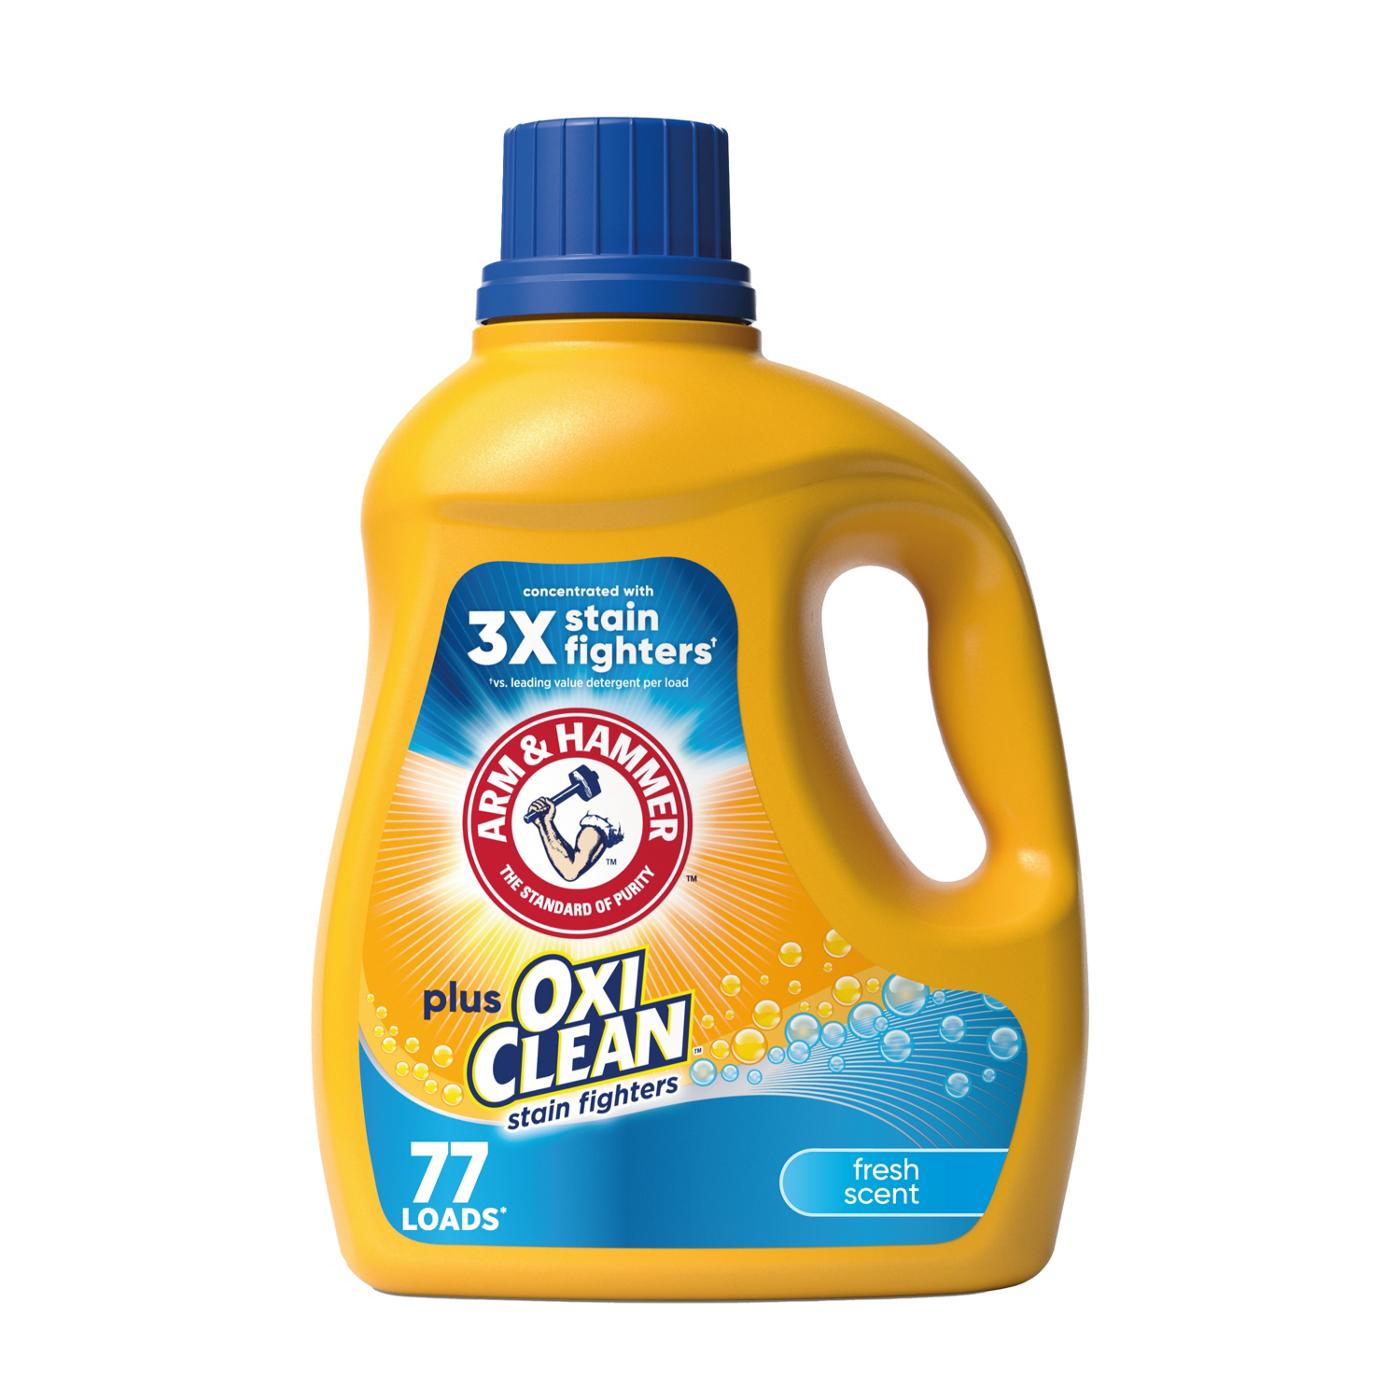 Arm & Hammer Plus OxiClean HE Liquid Laundry Detergent, 77 Loads - Fresh Scent; image 1 of 4